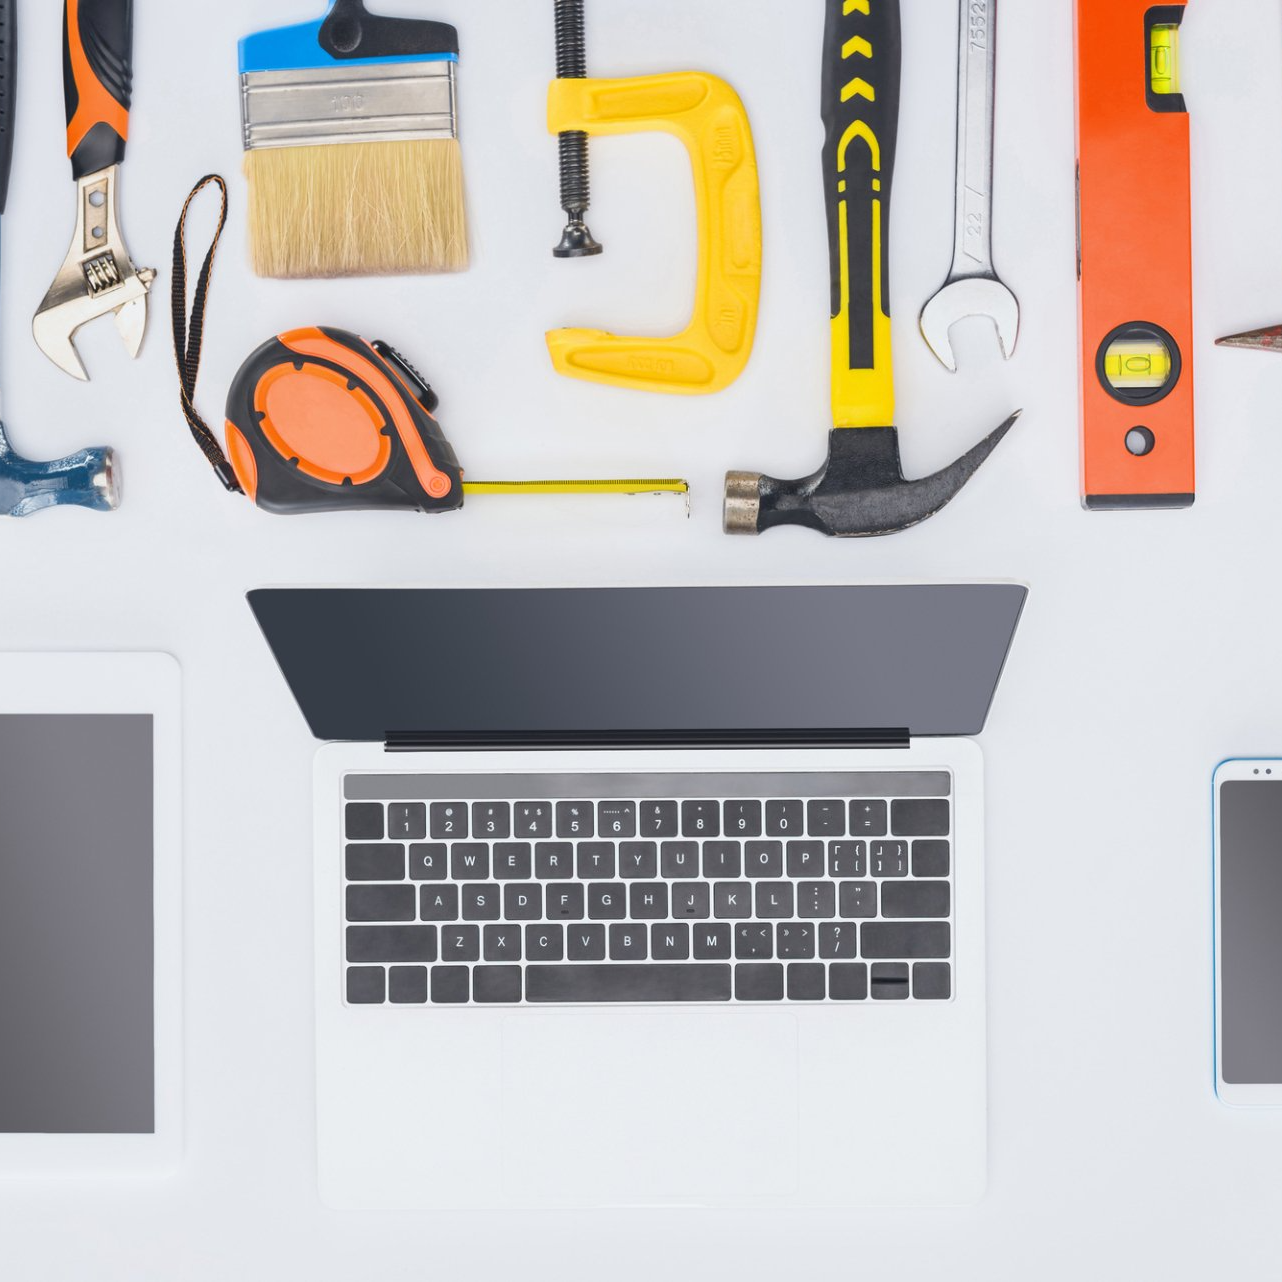 Super deductions when you buy tools and equipment